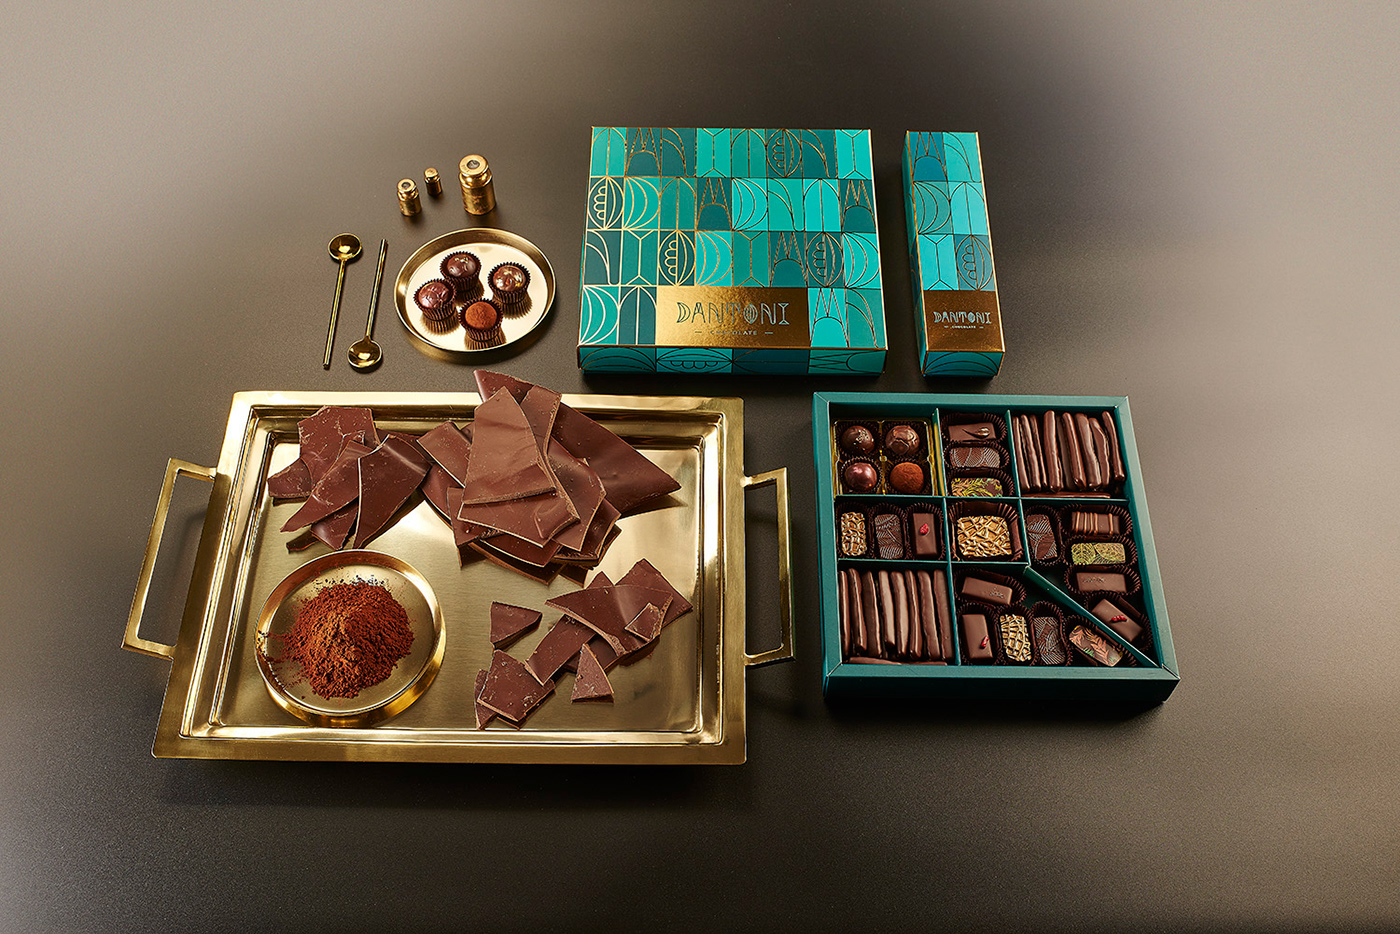 Luxury "art deco" packaging for an artisan chocolate manufacturer.